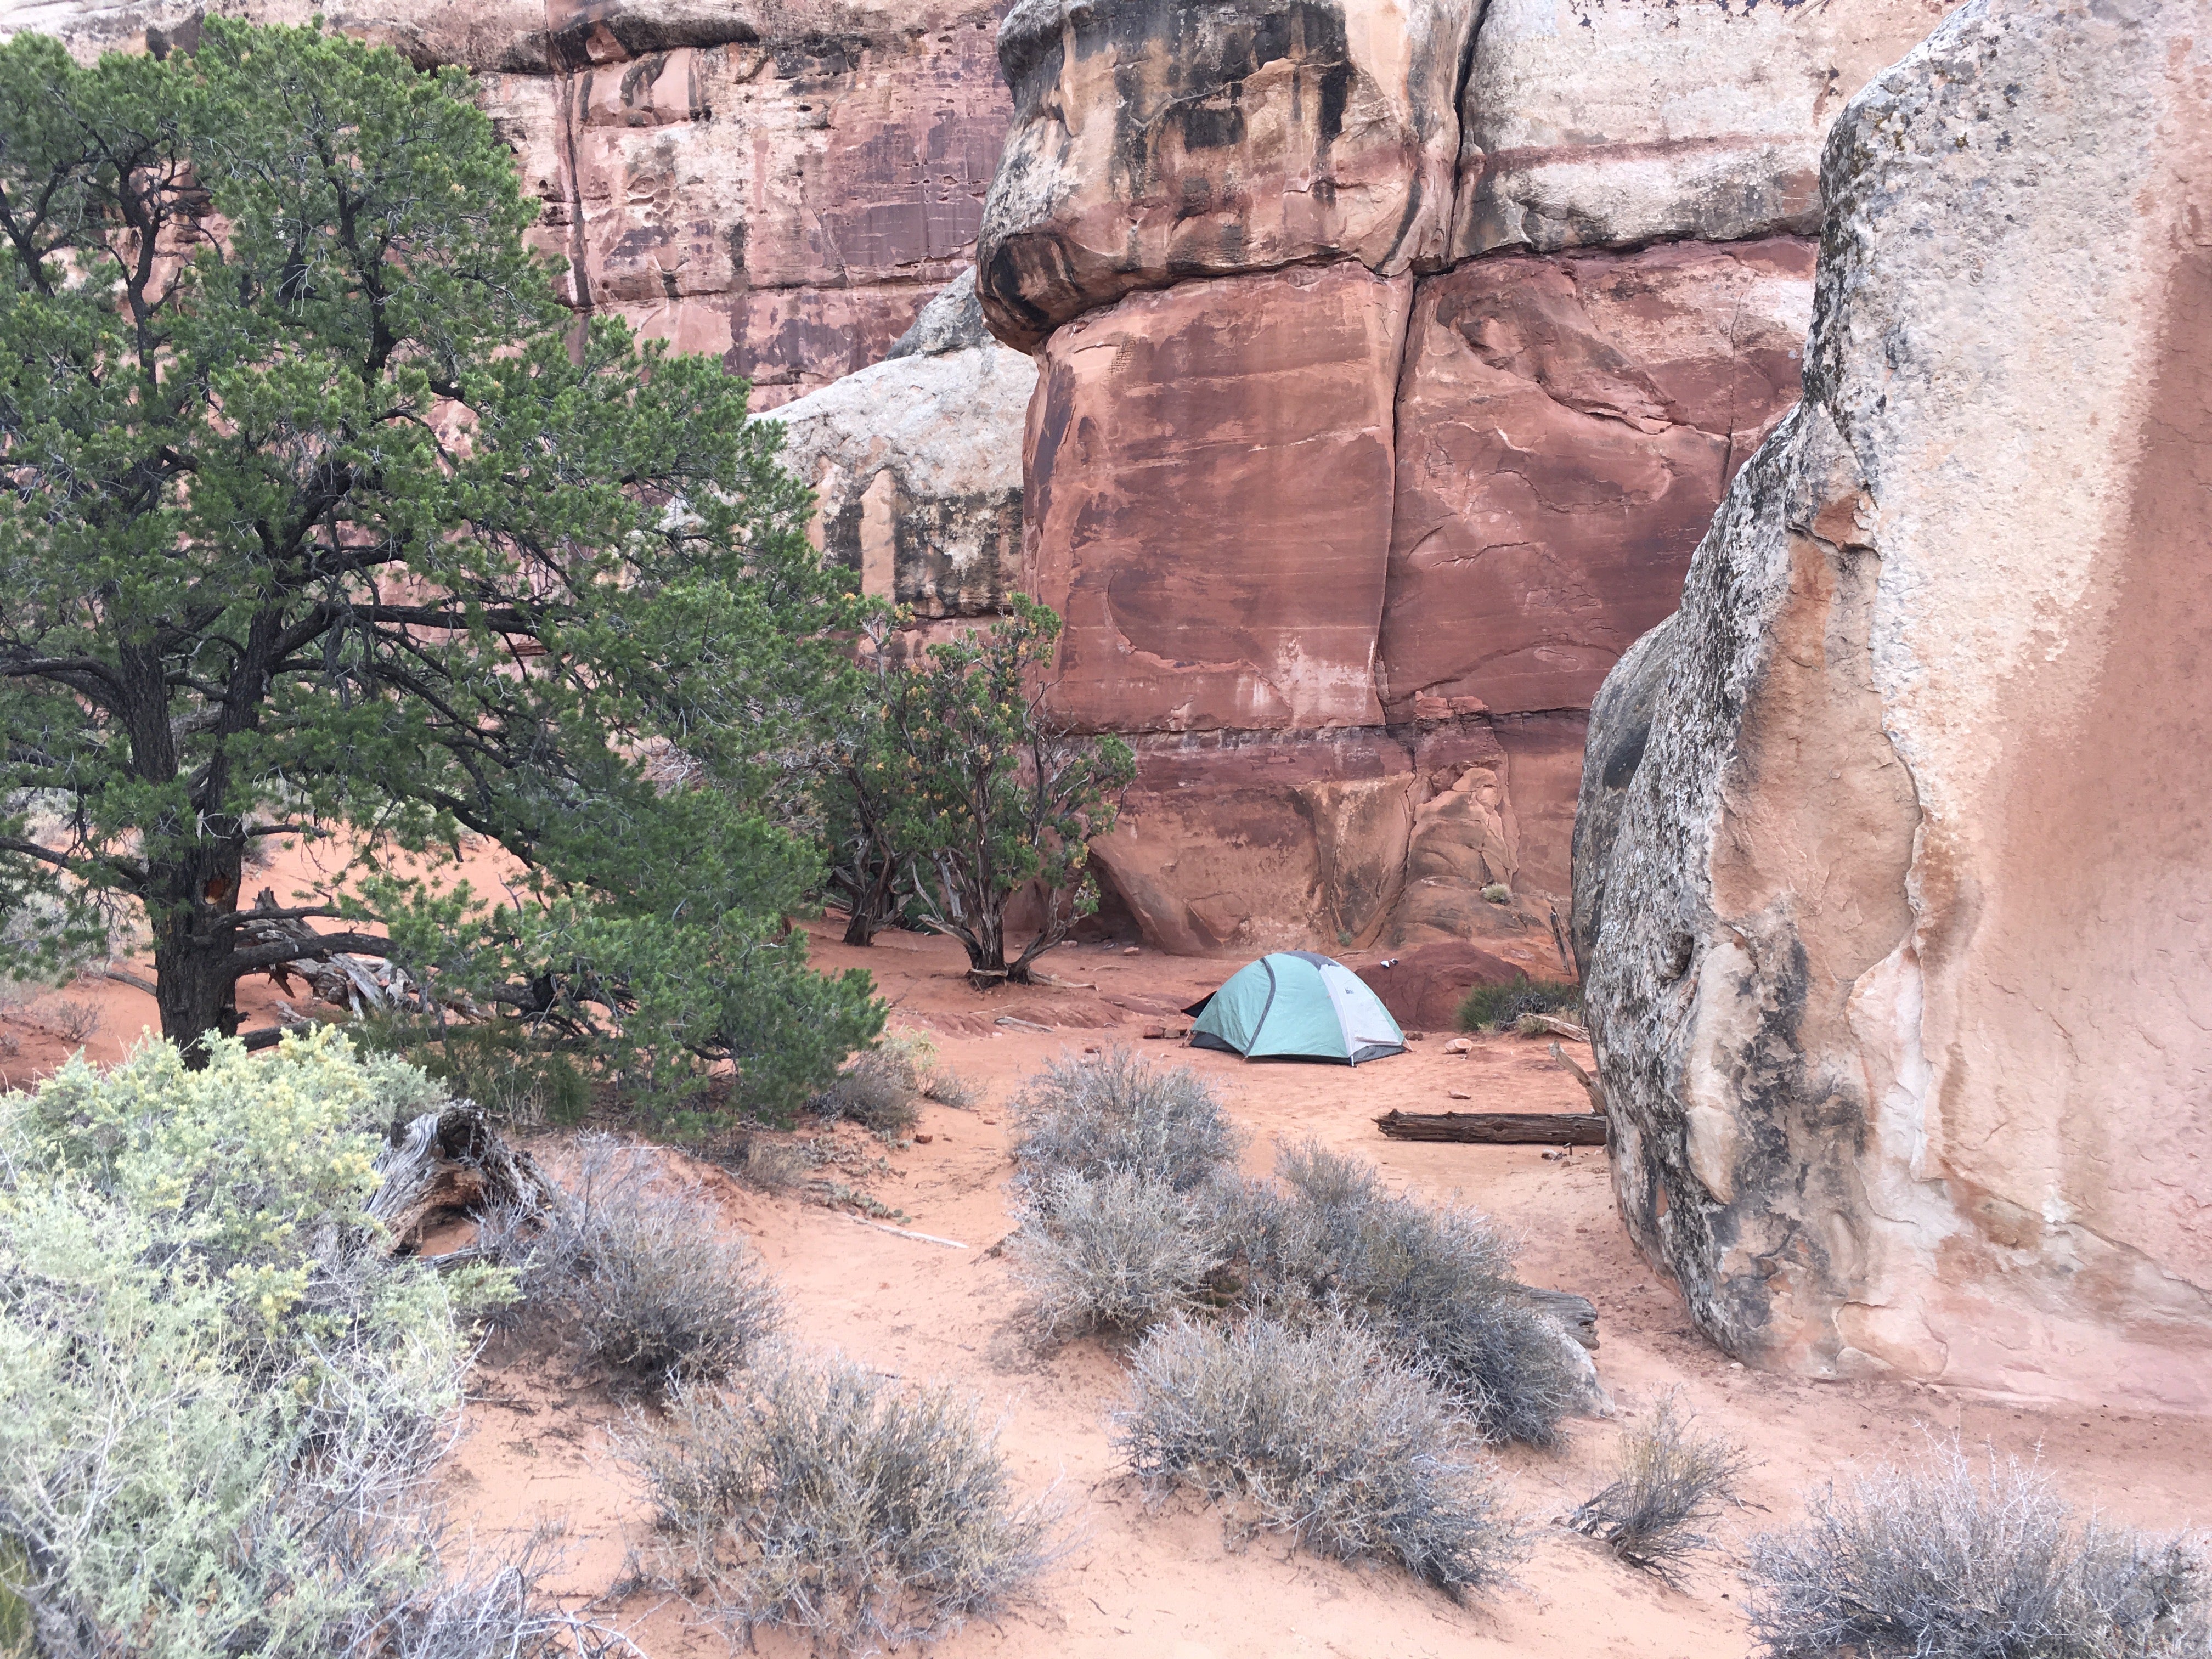 Camper submitted image from Chesler Park 2 (CP2) campsite in The Needles District — Canyonlands National Park - 4